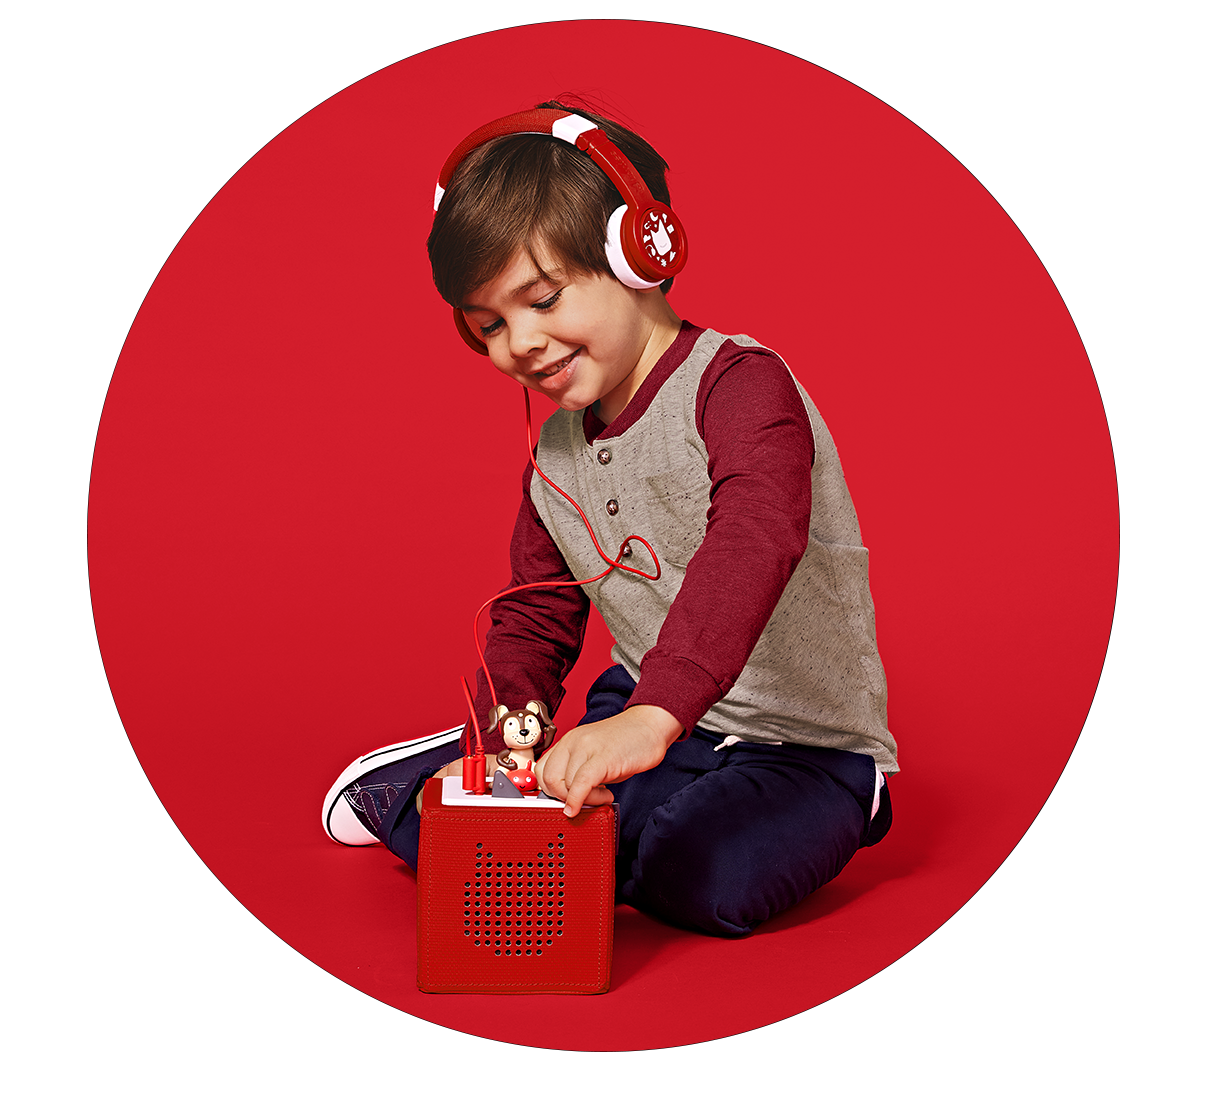 Young boy wearing red tonies headphones and playing with Red Toniebox